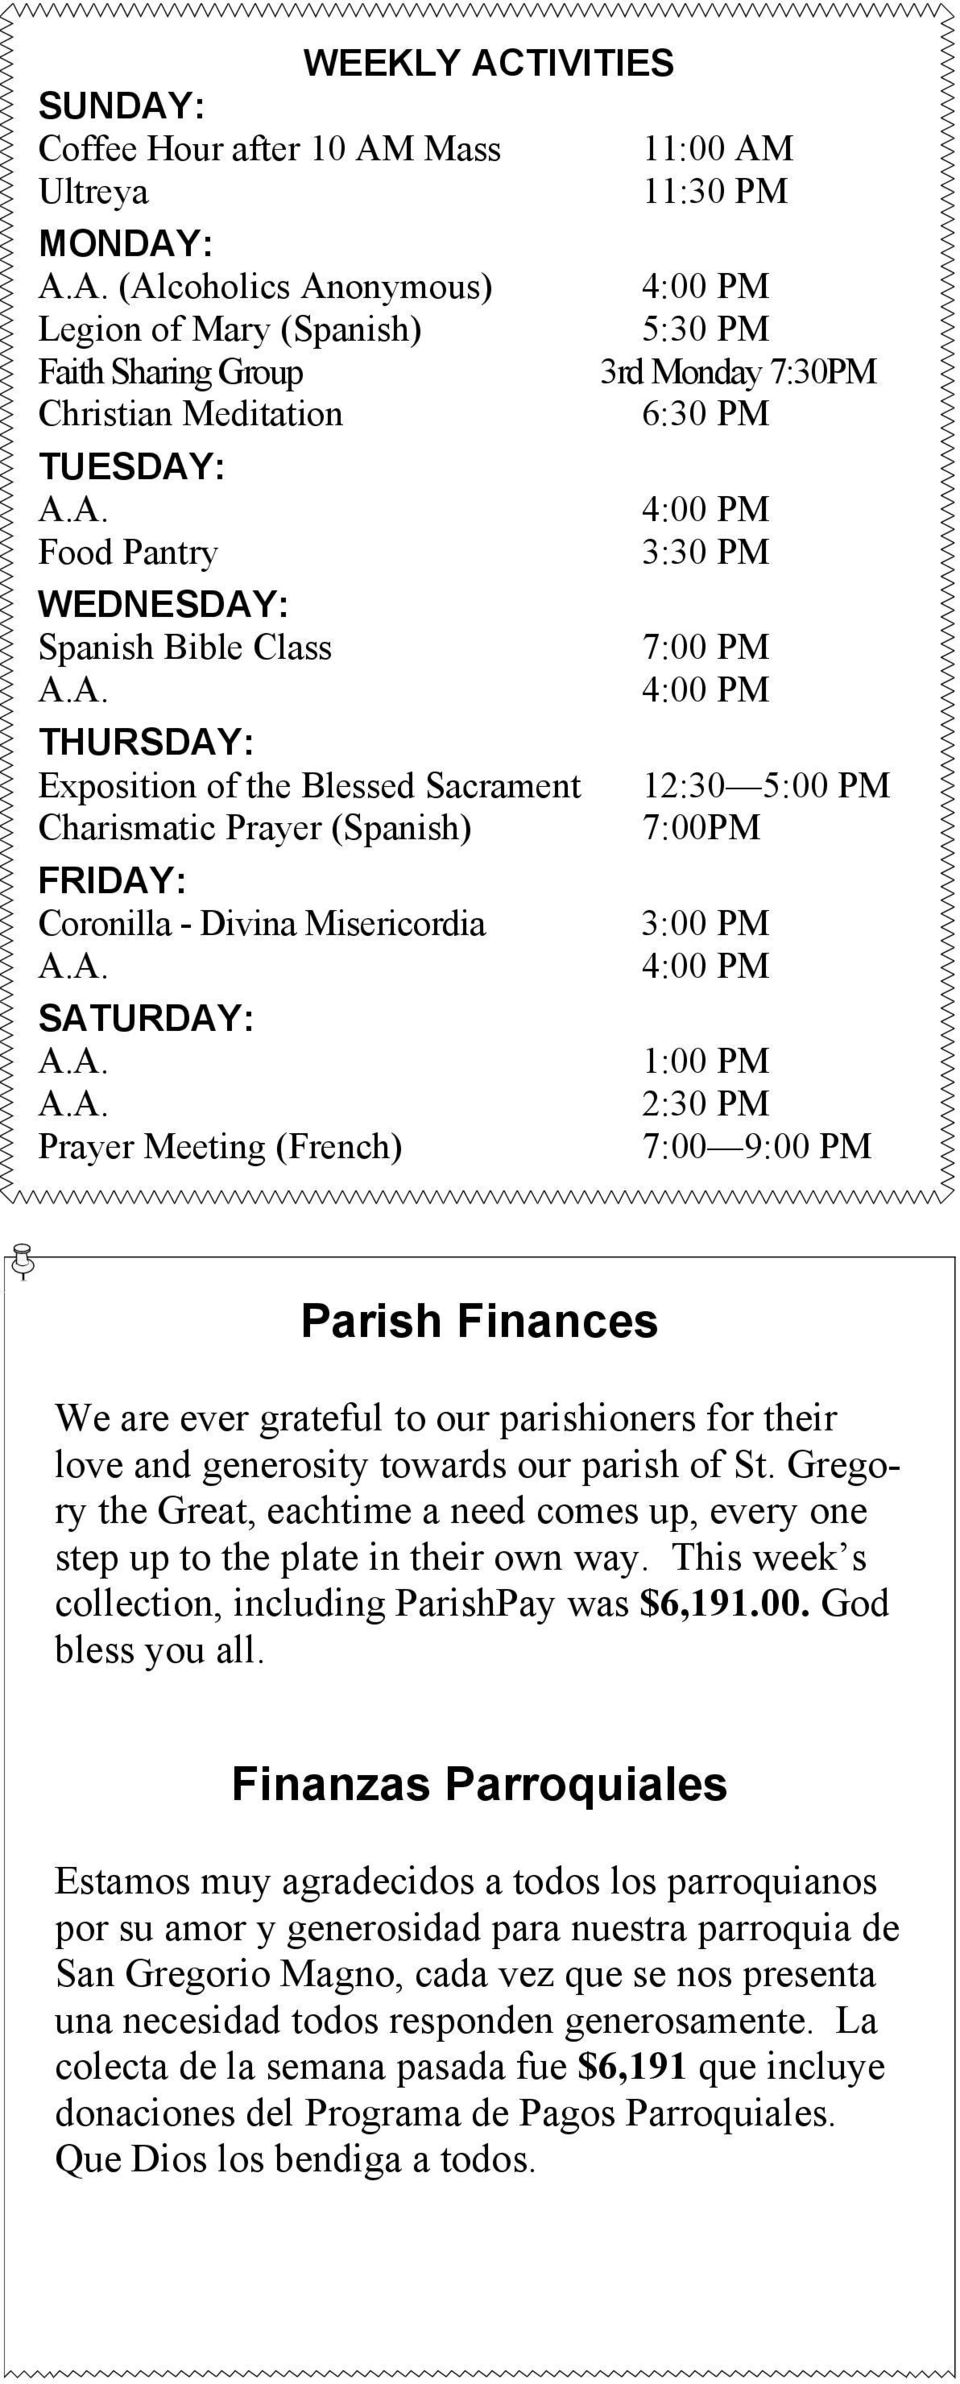 Coronilla - Divina Misericordia 3:00 PM SATURDAY: 1:00 PM 2:30 PM Prayer Meeting (French) 7:00 9:00 PM Parish Finances We are ever grateful to our parishioners for their love and generosity towards